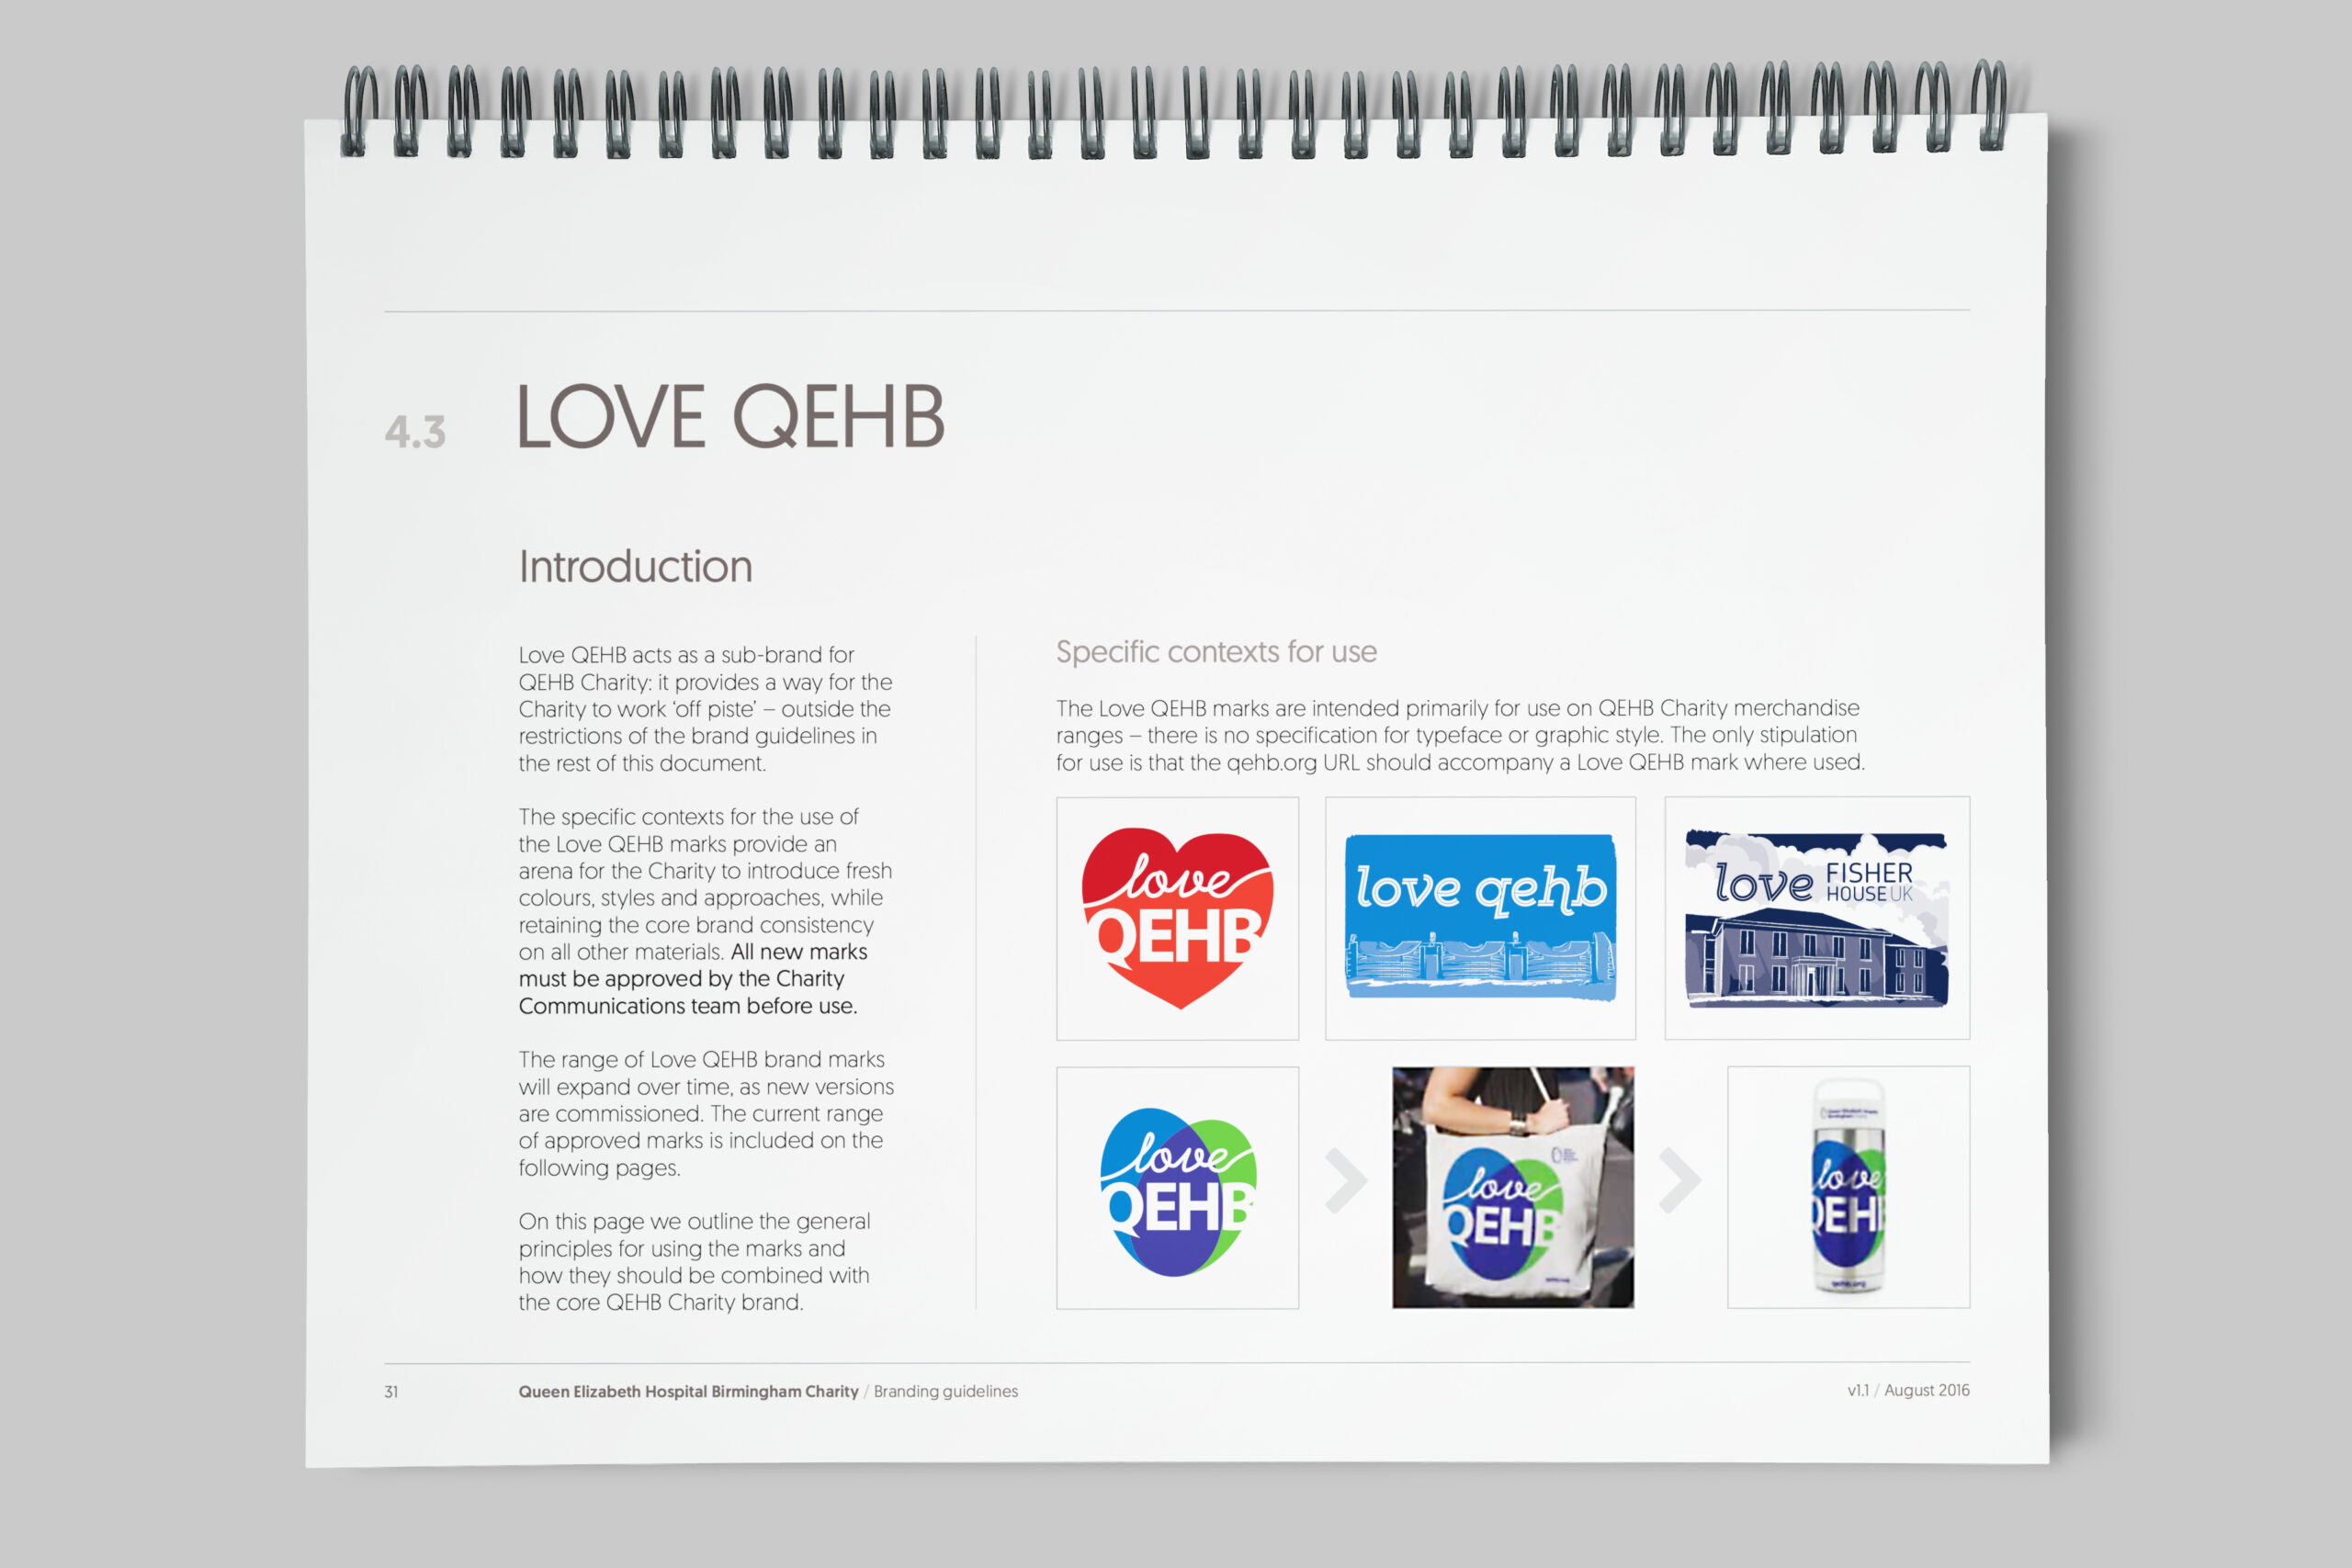 Spread from the 'Love QEHB' sub-brand section of the brand guidelines, showing the variety of marks developed for use on fundraising merchandise